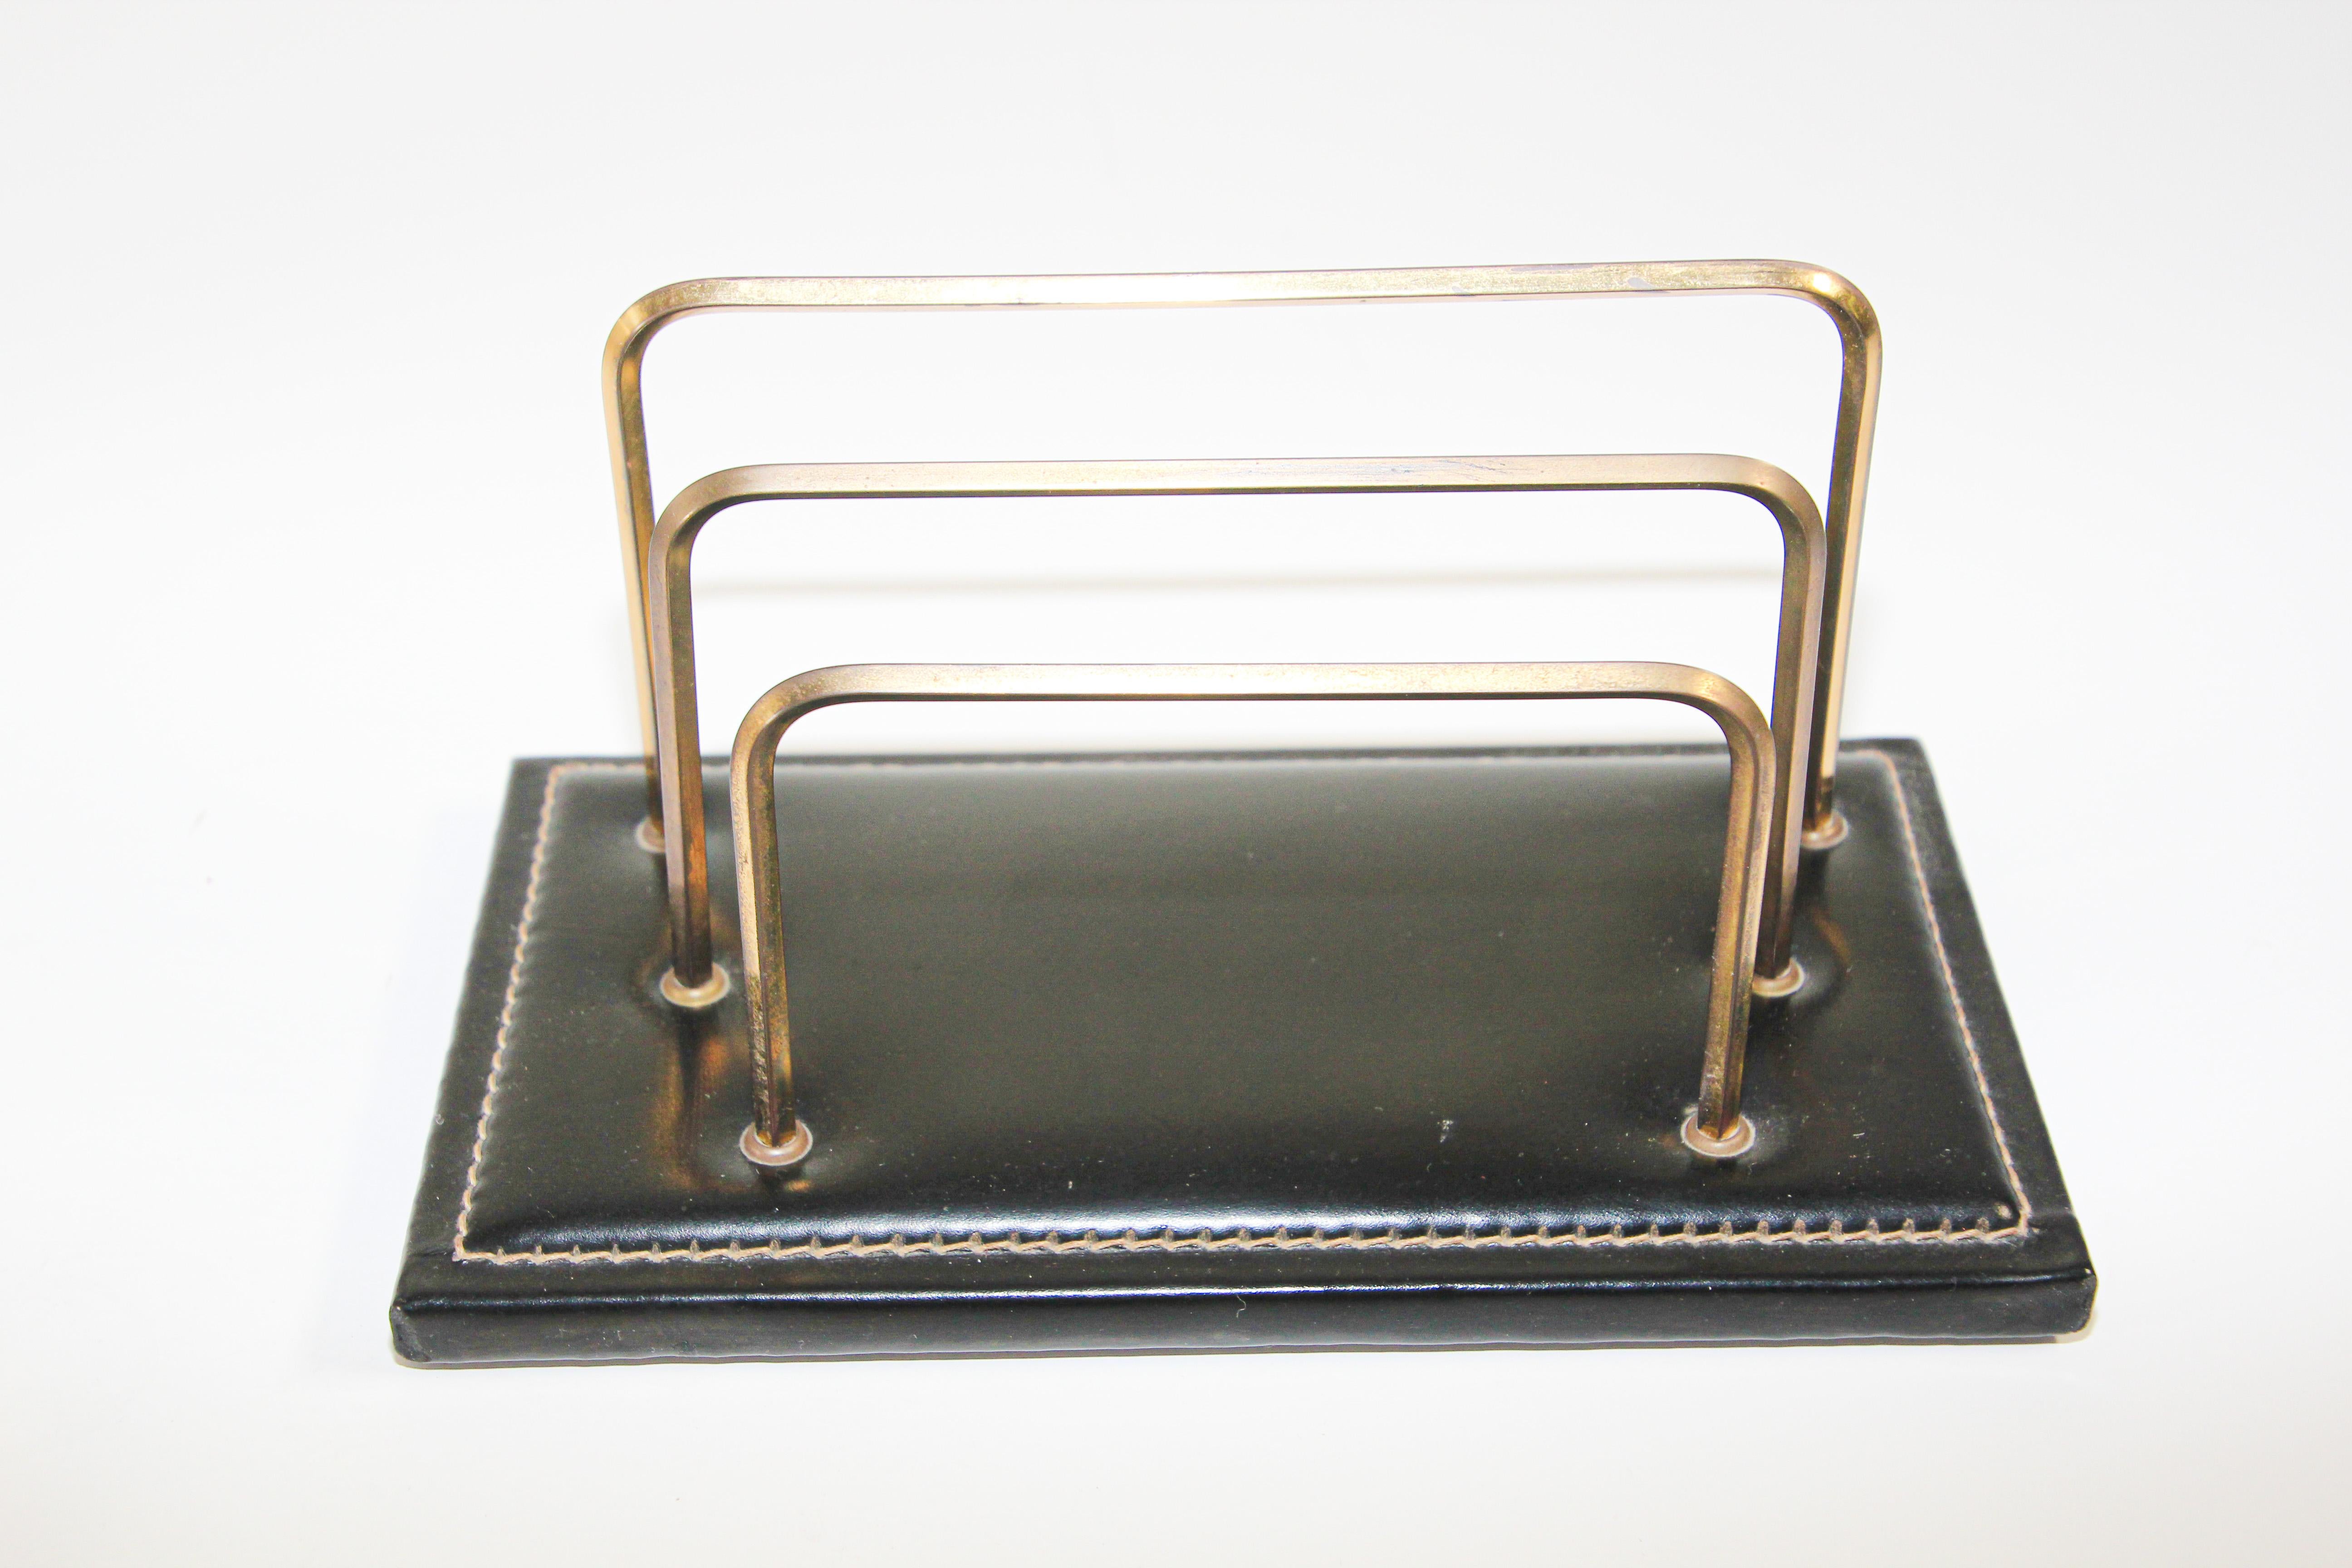 Jacques Adnet Art Deco Black Leather Saddle Stitching Brass Desk Set 1950 France.
Adnet Art Deco style desk set comprising of a black leather and brass letter desk holder, rack, picture frame and a leather note pad with original paper refill and